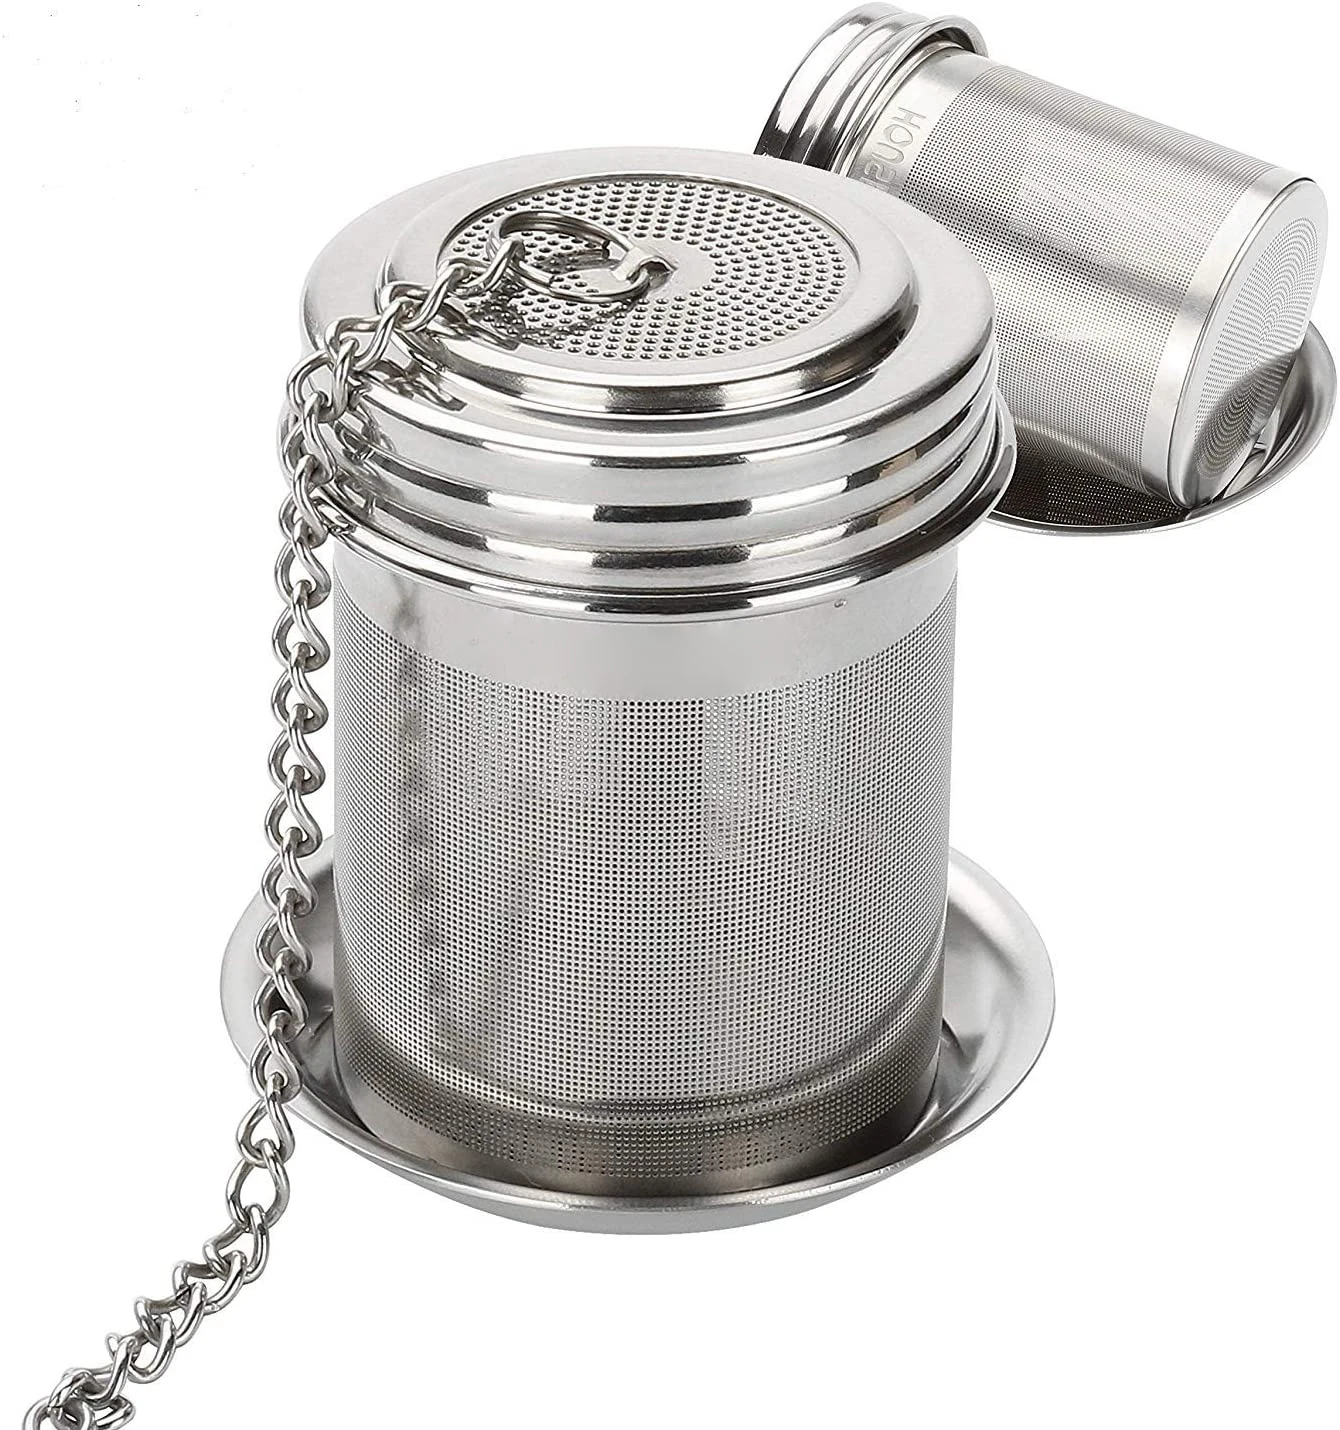 

Tea Ball Infuser Cooking Infuser Extra Fine Mesh Tea Infuser Threaded Connection 18/8 Stainless Steel Strainer Set of 4pcs